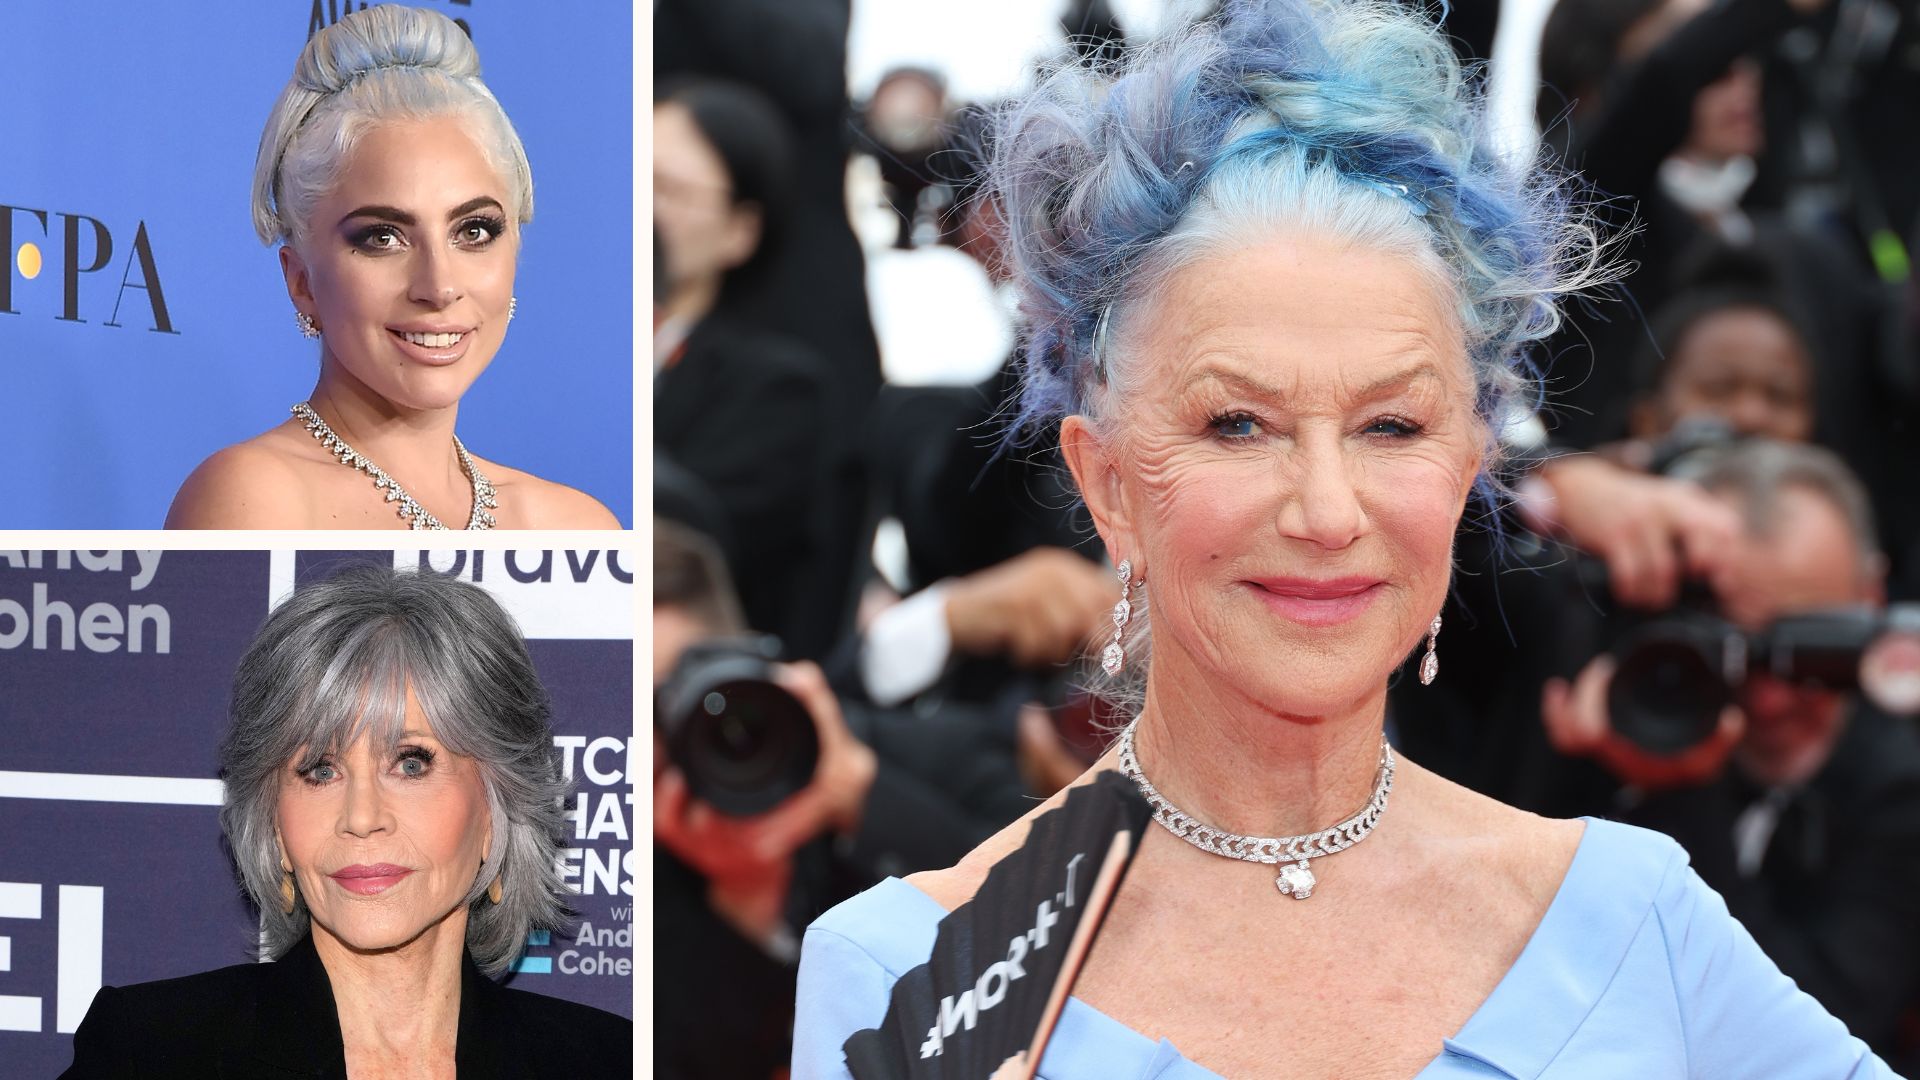 Salt and Pepper Hair Color – Make Your Gray Hair Look Super Trendy